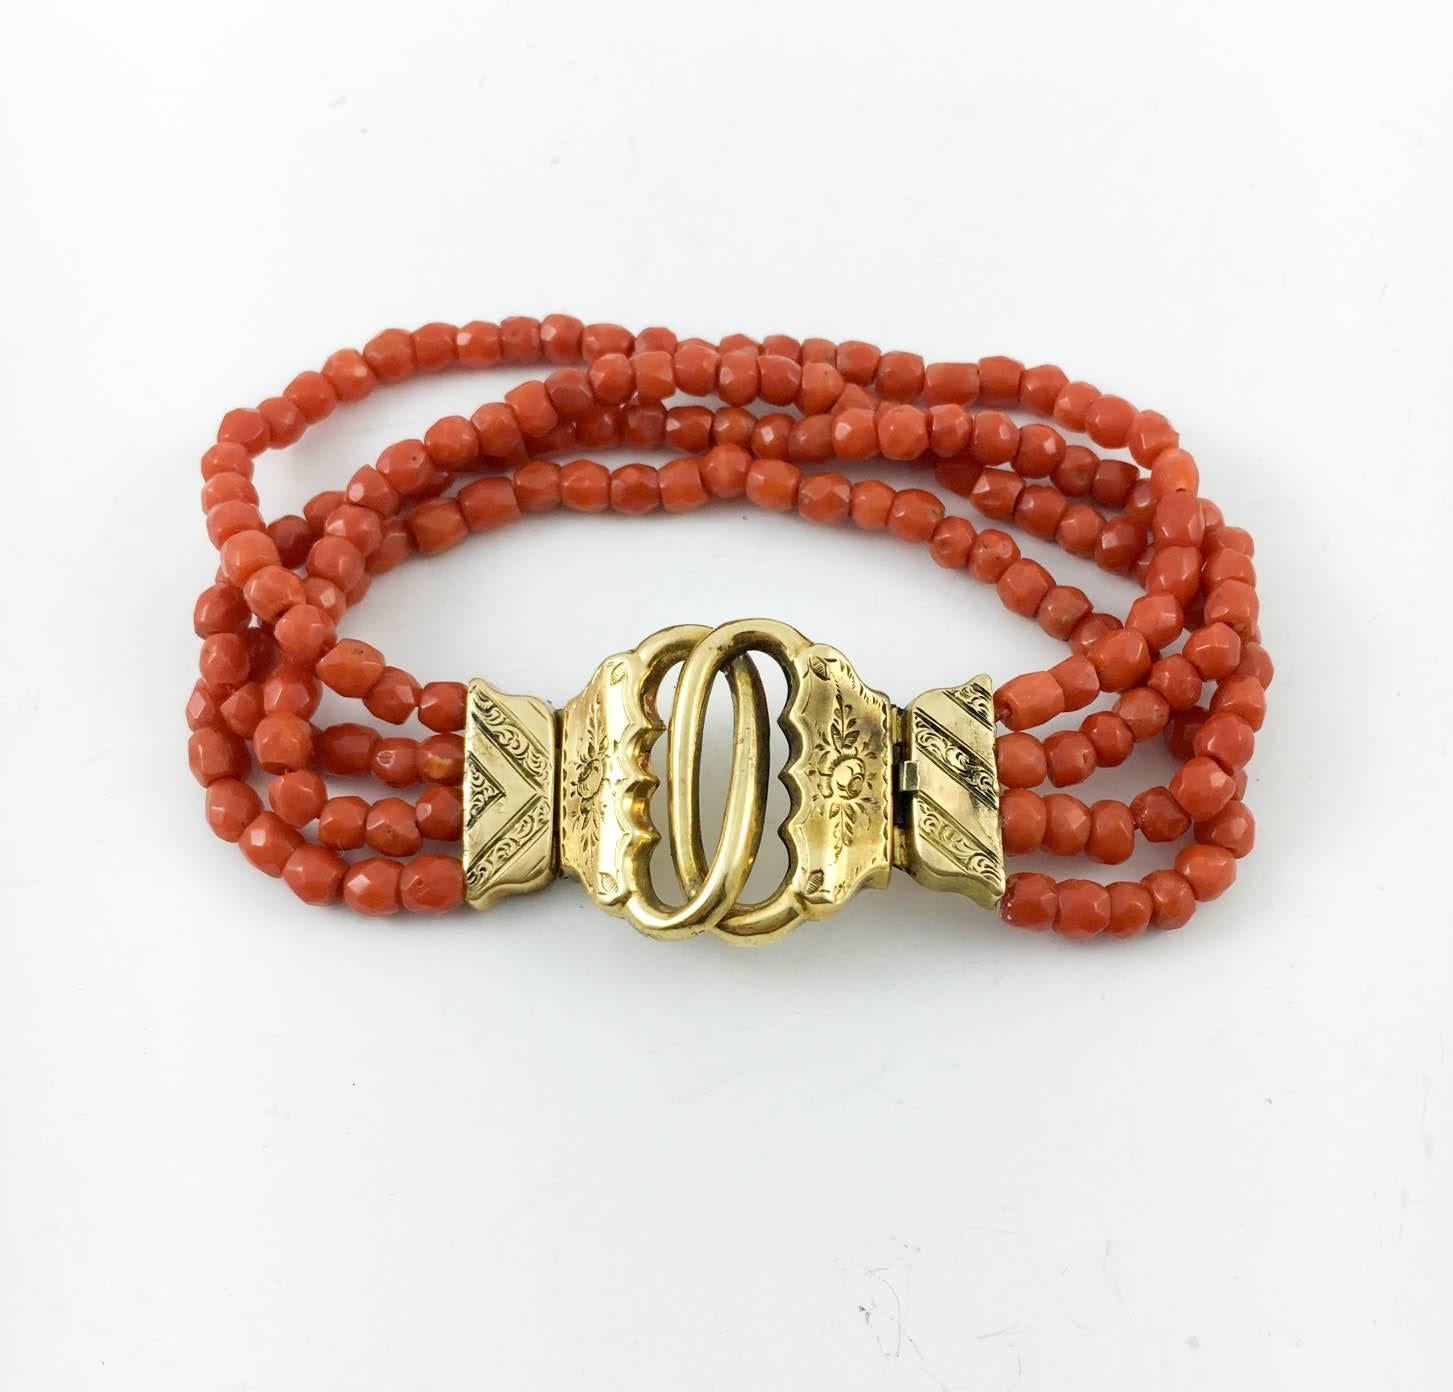 Stylish Antique Coral and Gold Bracelet. This very elegant bracelet dates back from about 1820s – 1840s. It features 4 strands of facetted coral beads and an 18ct gold clasp, with a lovely pattern on it. Hallmarked. This is a beautiful and